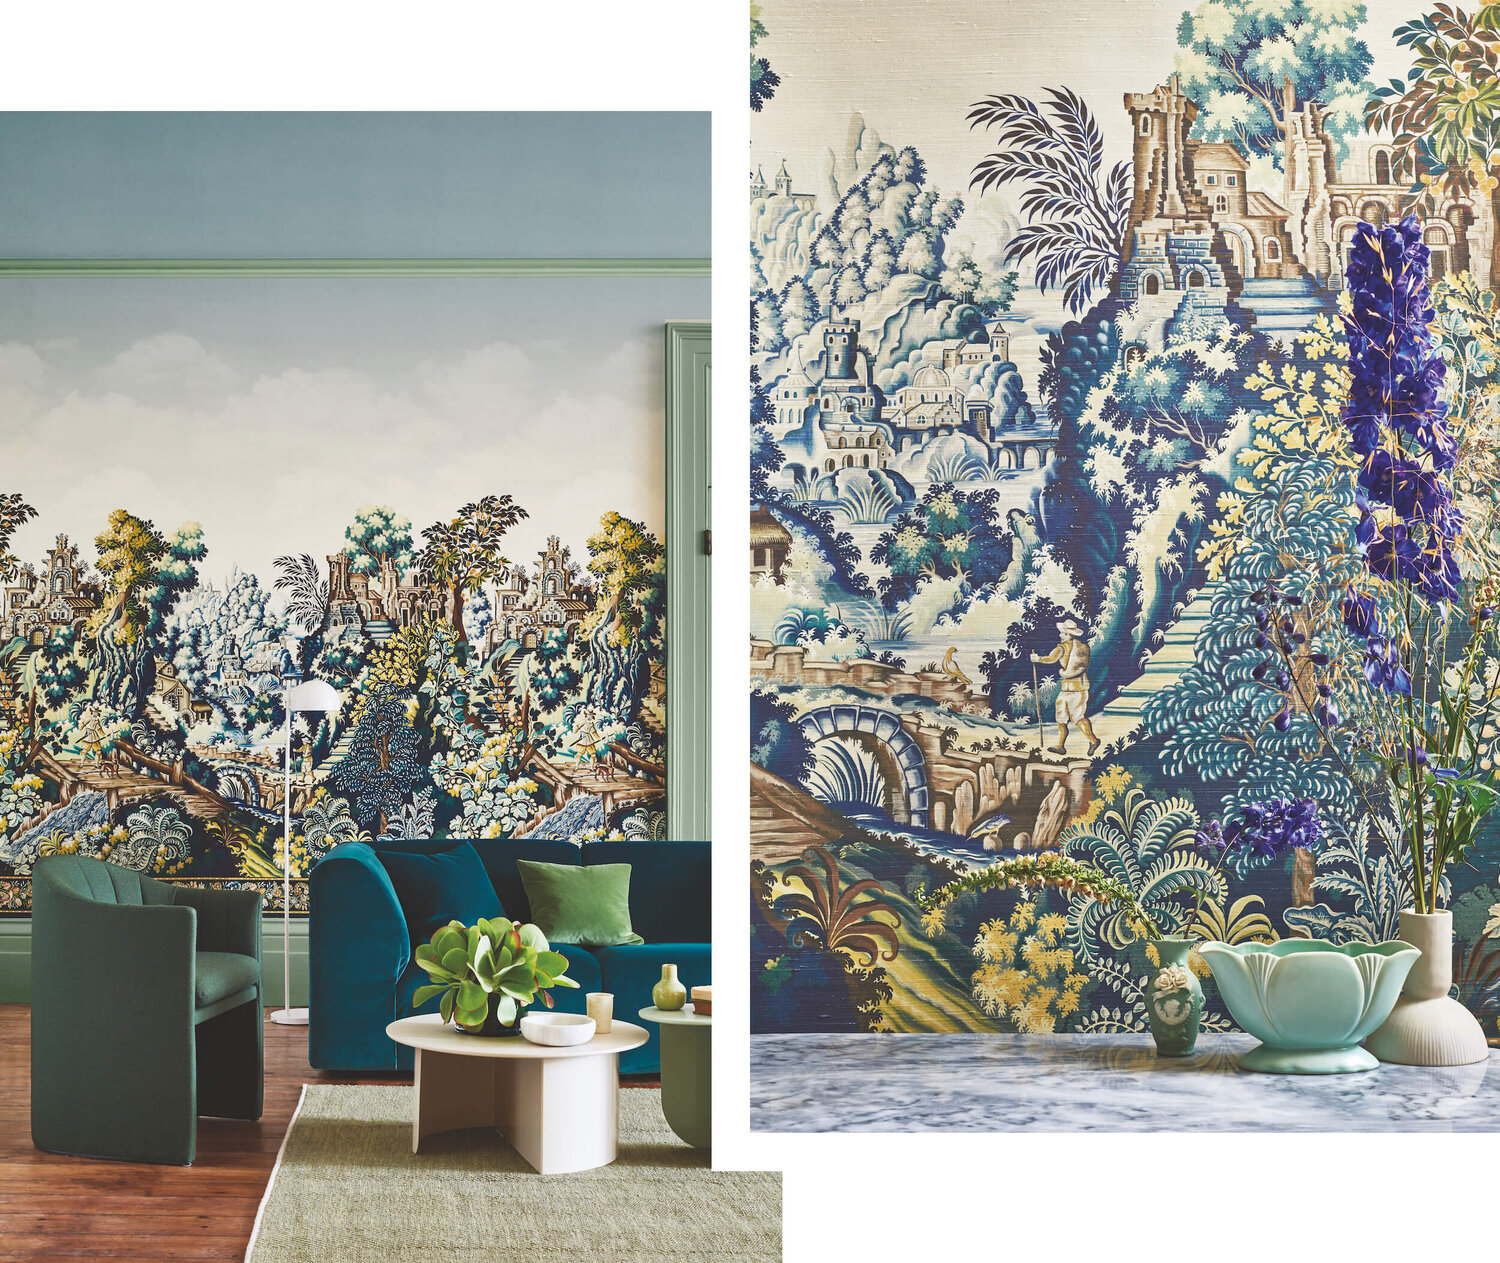 Side by side views of graphic wallcovering. One is shown at a distance with furniture in foreground, while the other is a close of a section of the elaborate design.